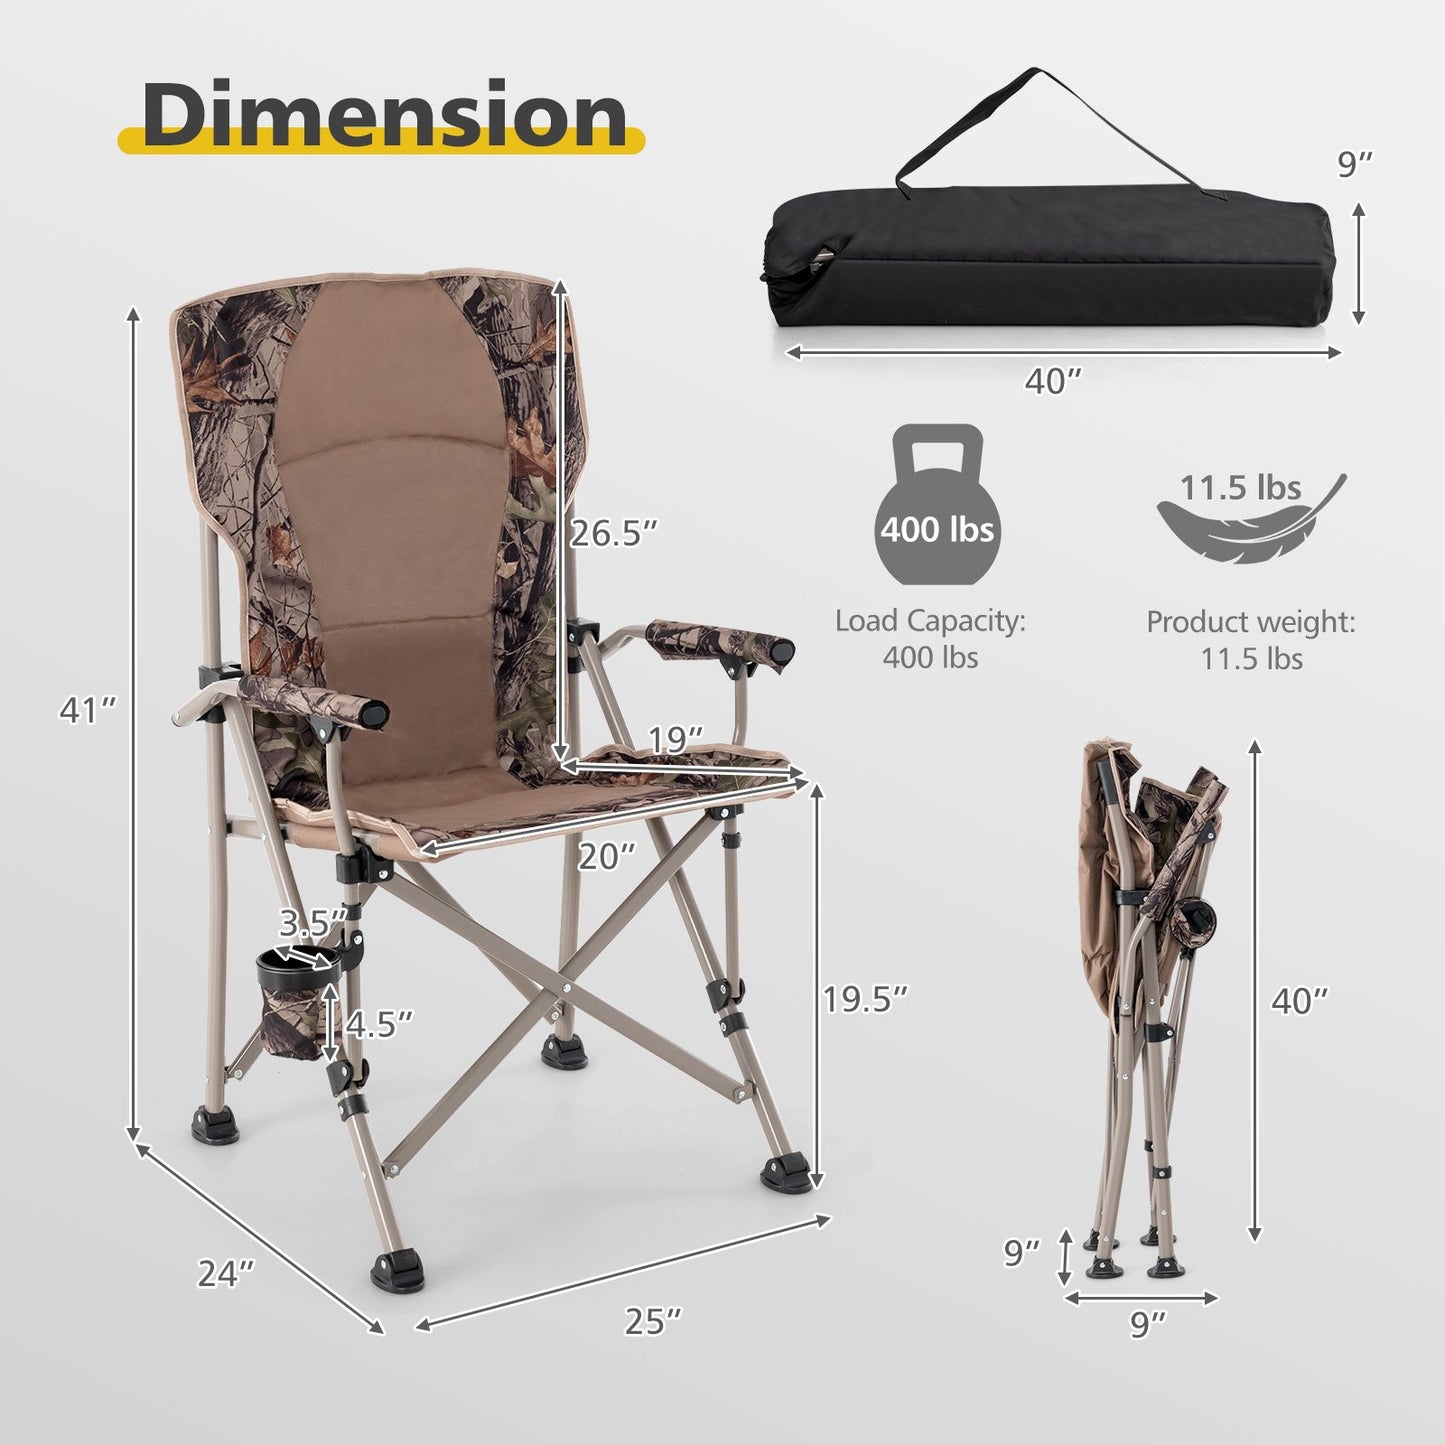 Portable Camping Chair with 400 LBS Metal Frame and Anti-Slip Feet, Brown